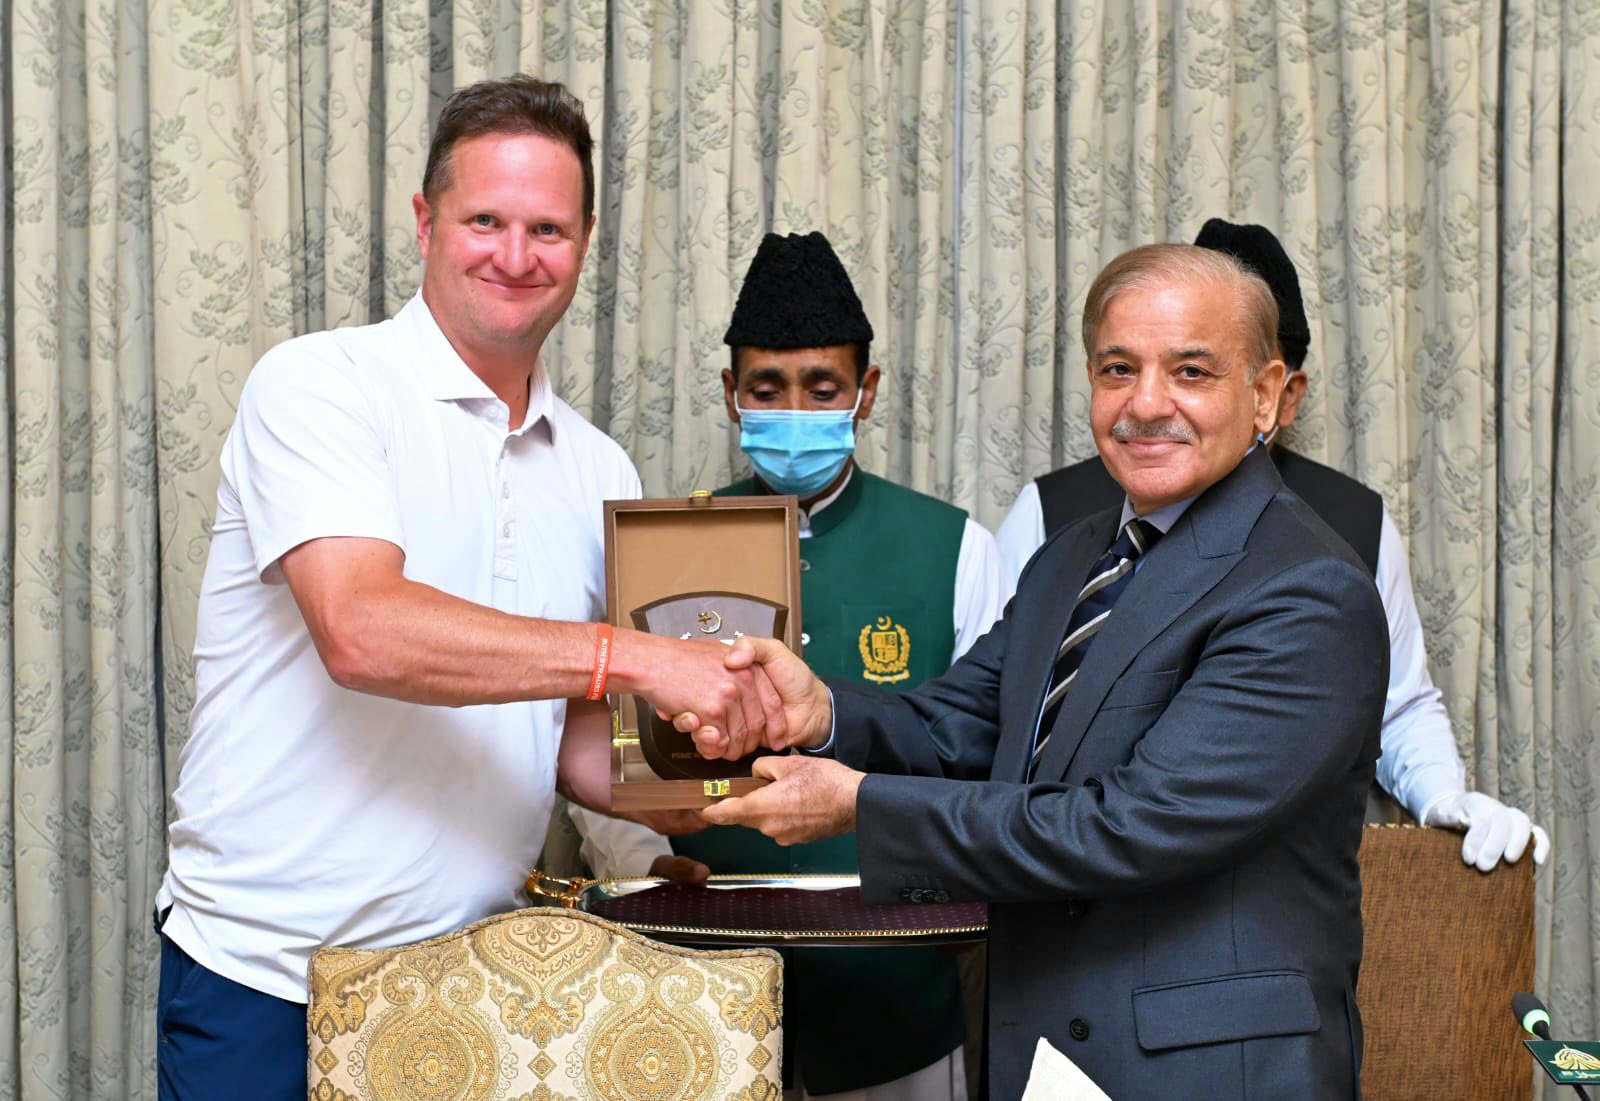 Prime Minister Shehbaz Sharif hosted a reception for Pakistan and England Cricket team.